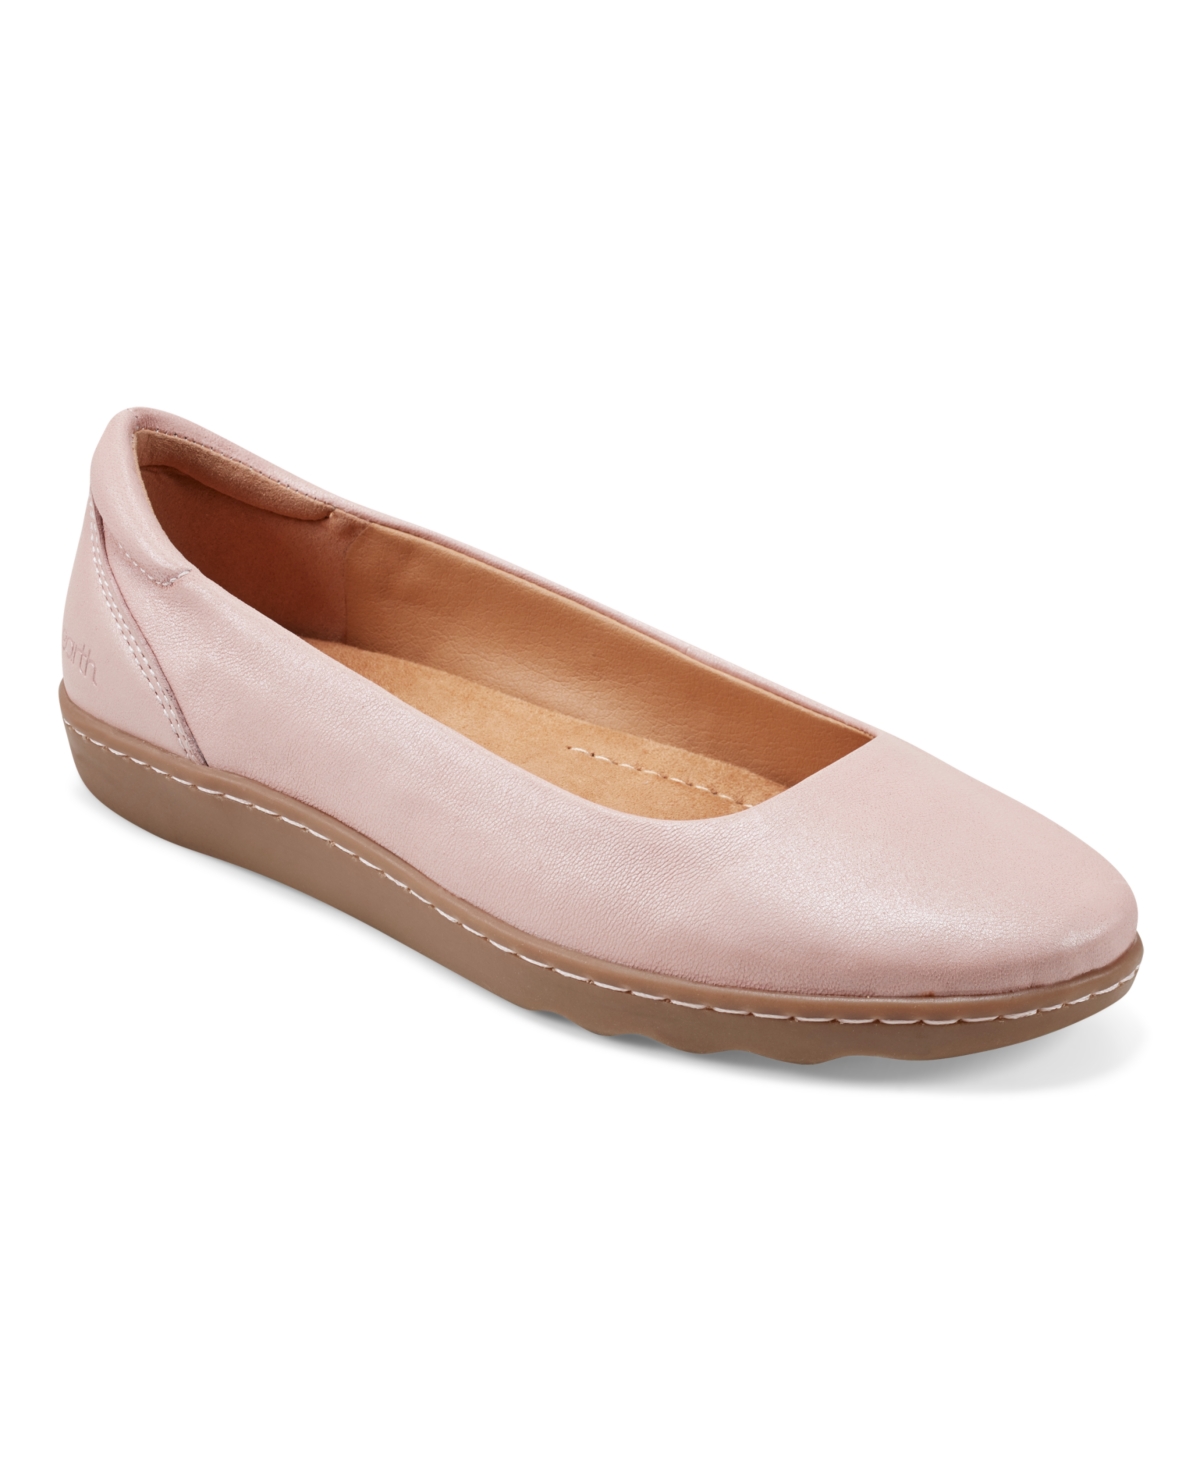 Shop Earth Women's Landen Slip-on Round Toe Casual Ballet Flats In Light Pink Leather